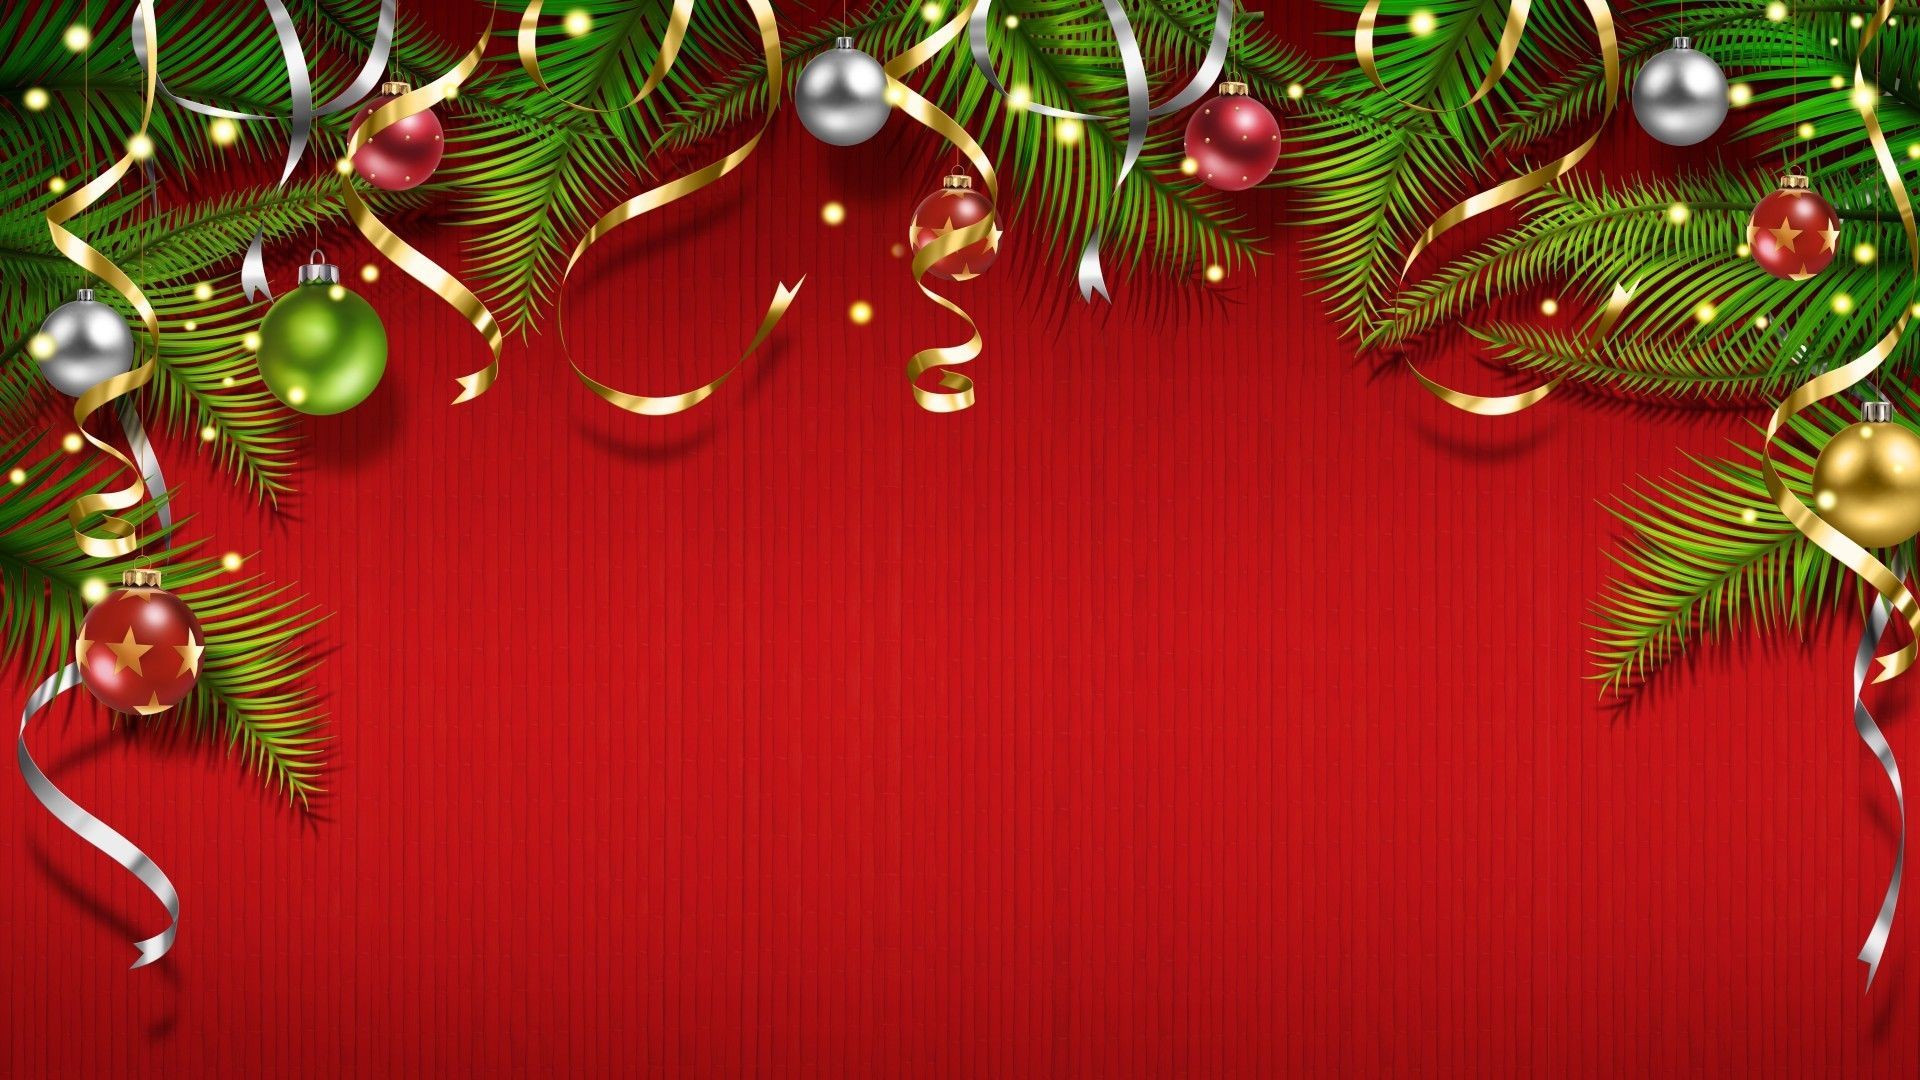 Red and Green Christmas Wallpaper Free Red and Green Christmas Background